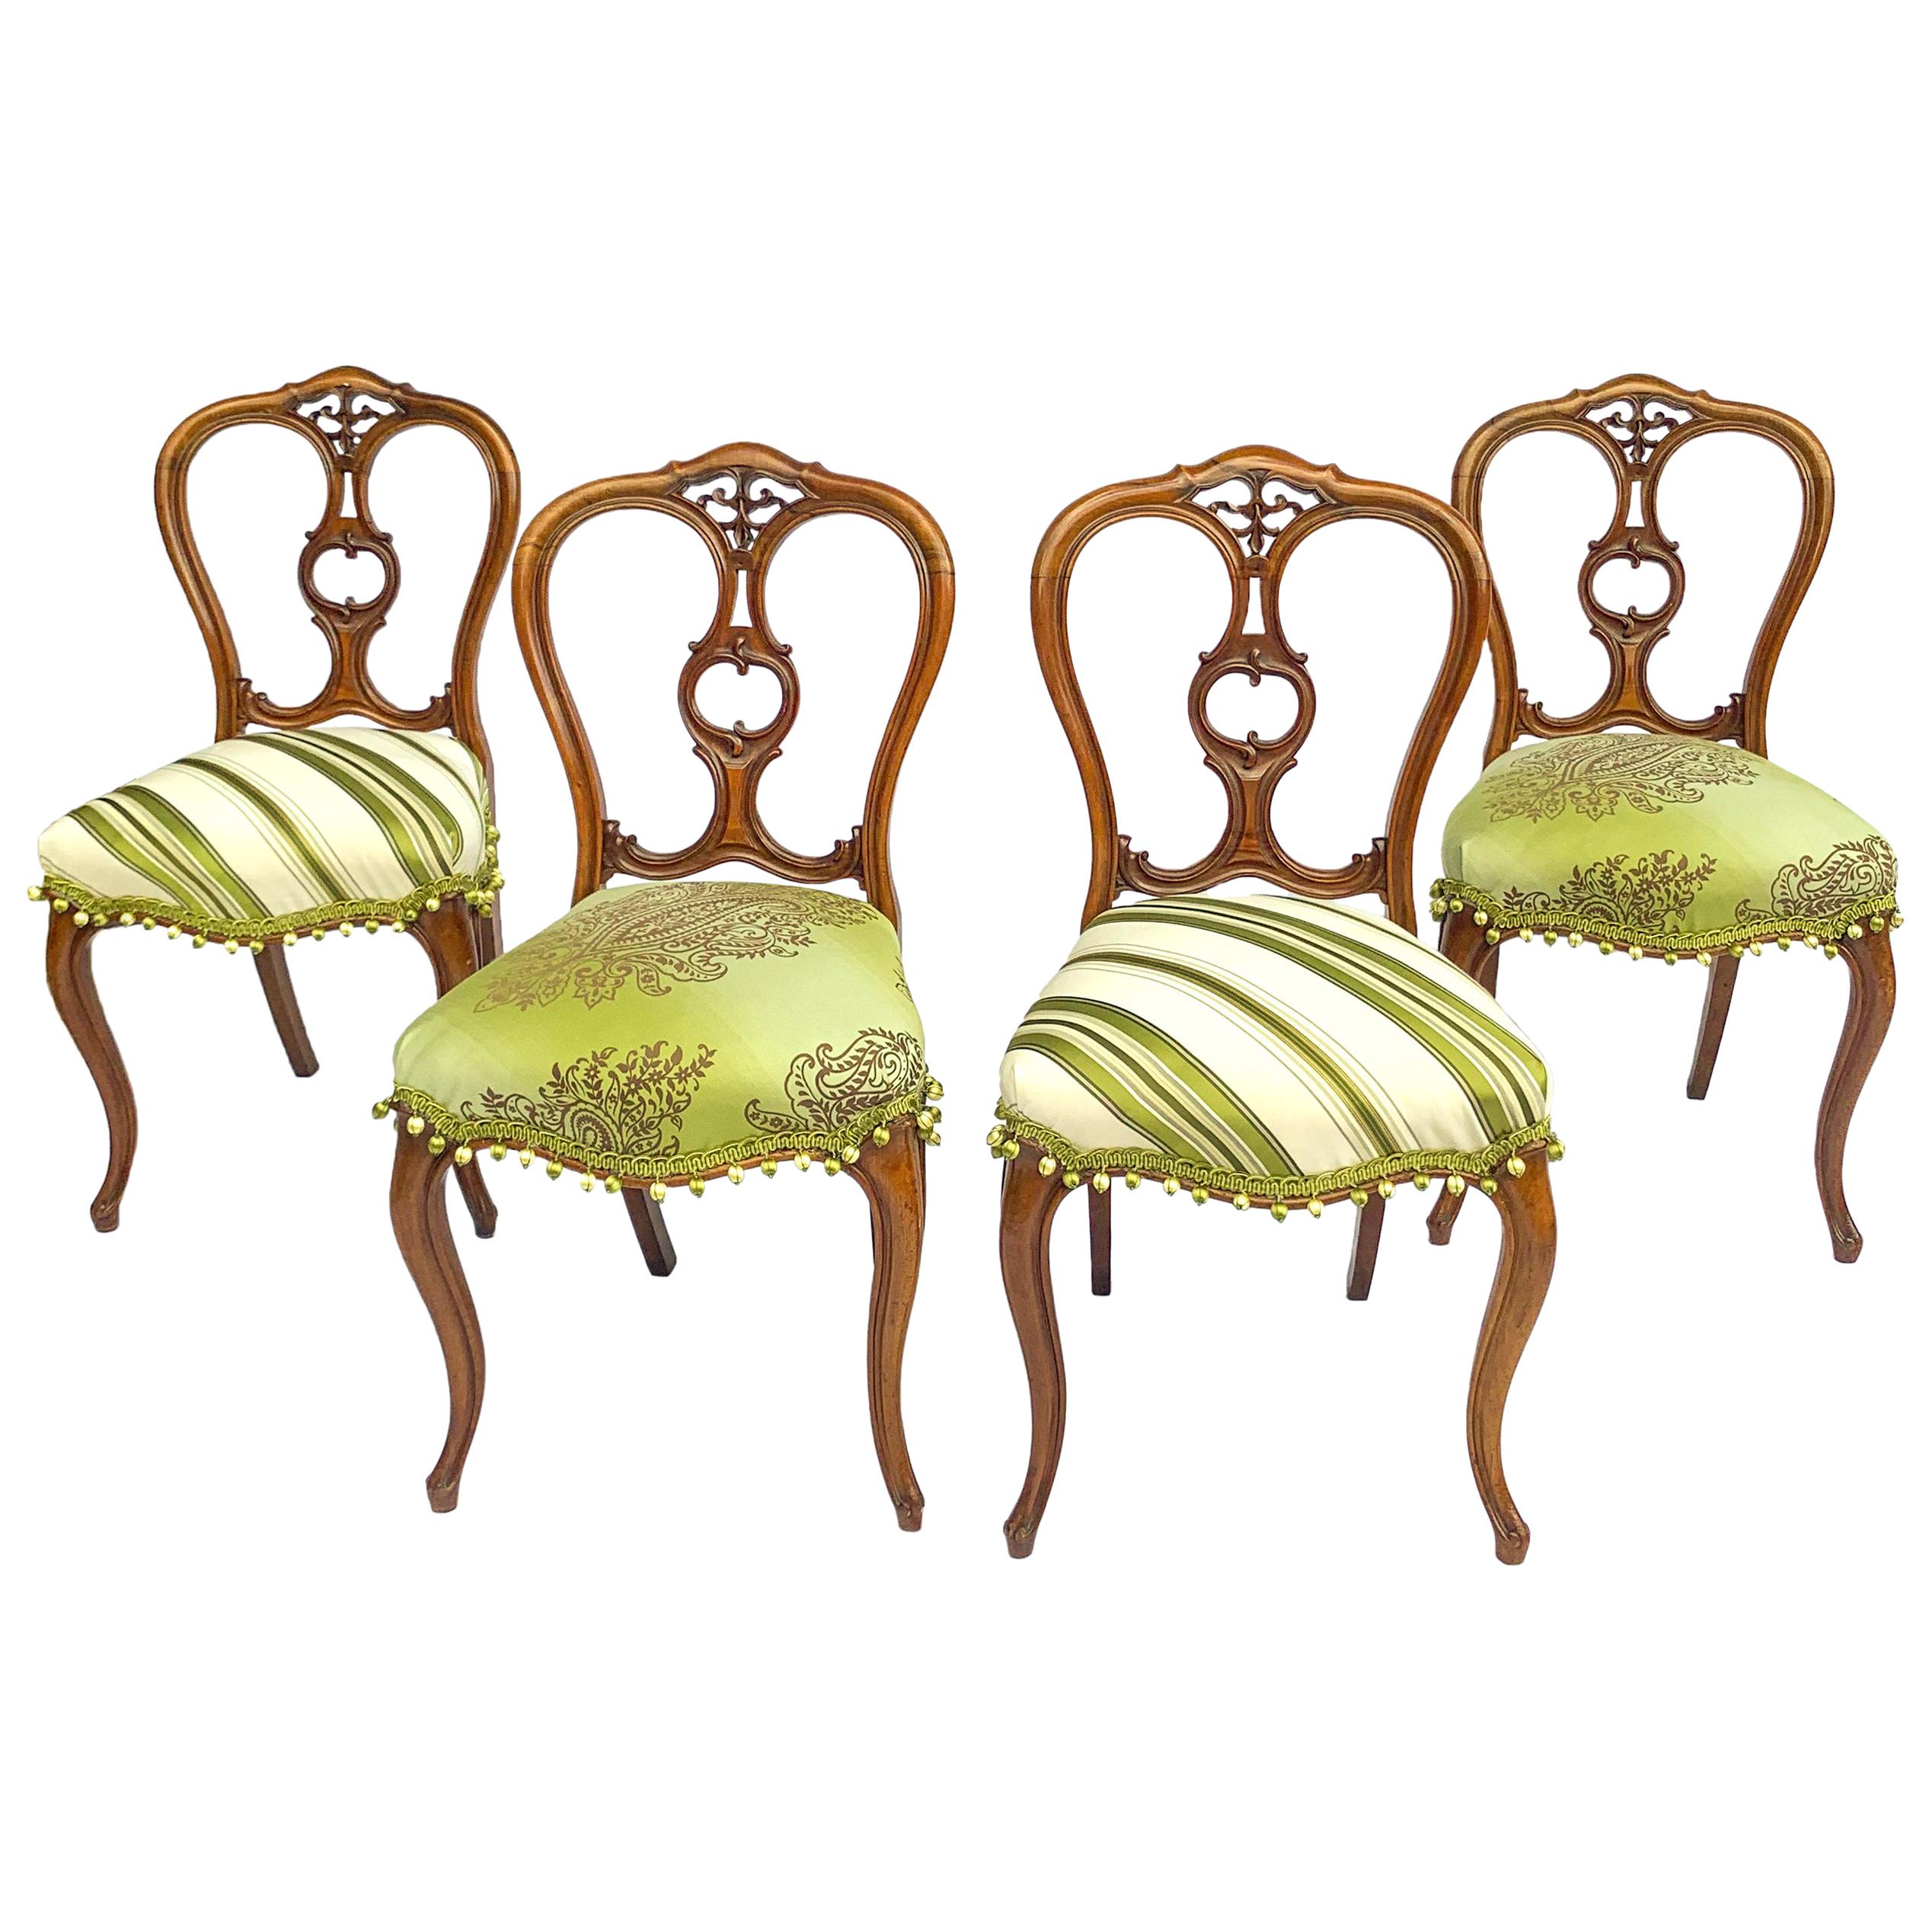 Early 20th Century Petite Victorian Style Elegantly Sculpted Balloon Back Chairs For Sale